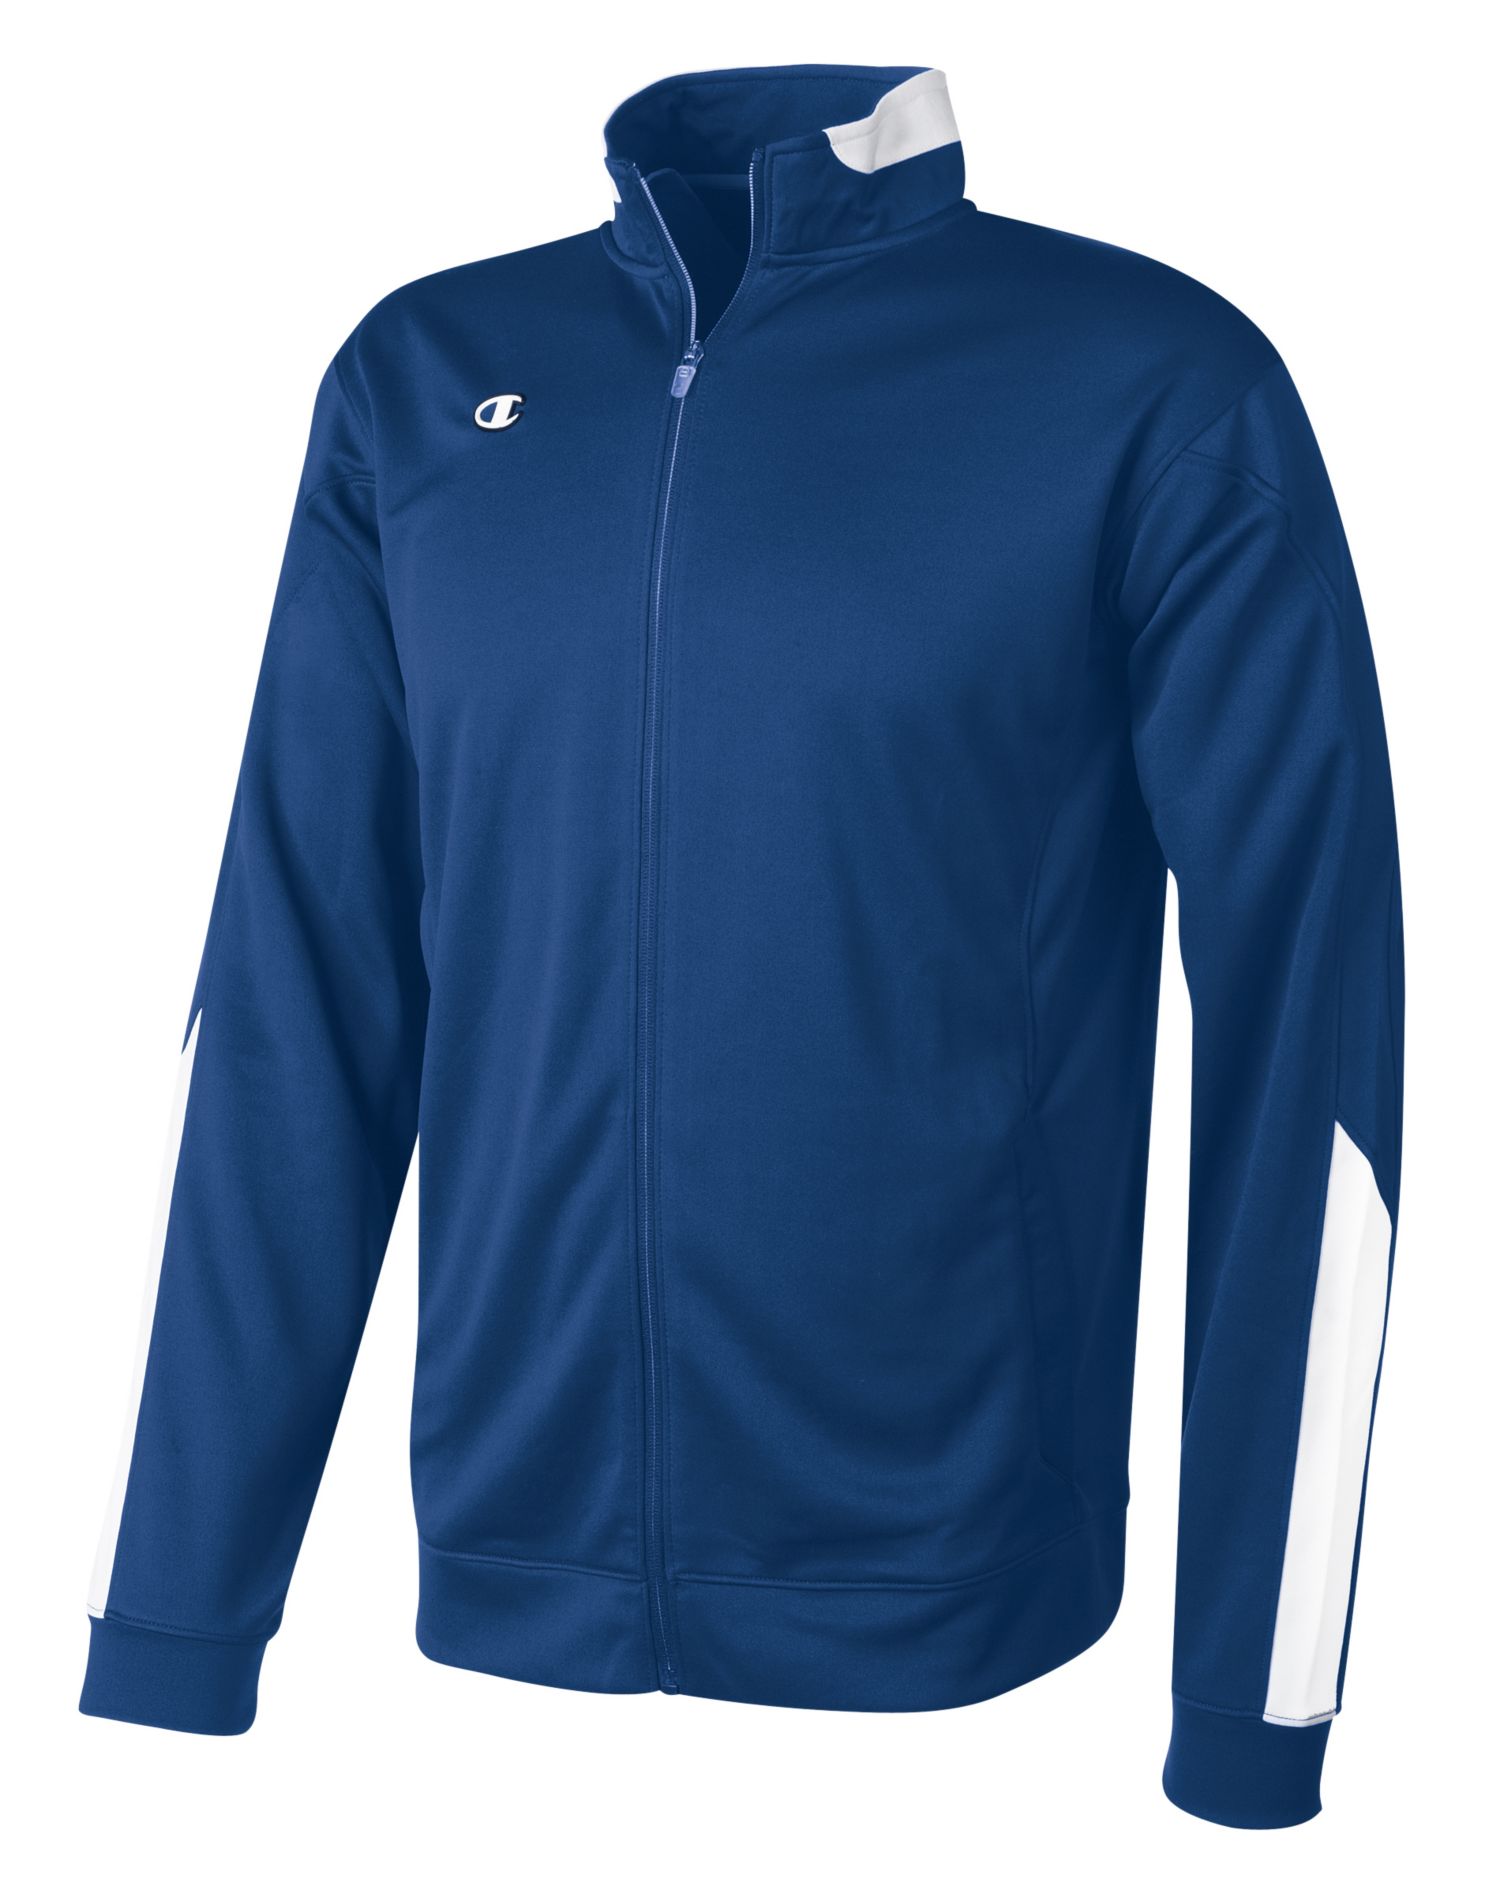 Champion Men  Long Sleeve athletic warm up and track jackets - image 1 of 2